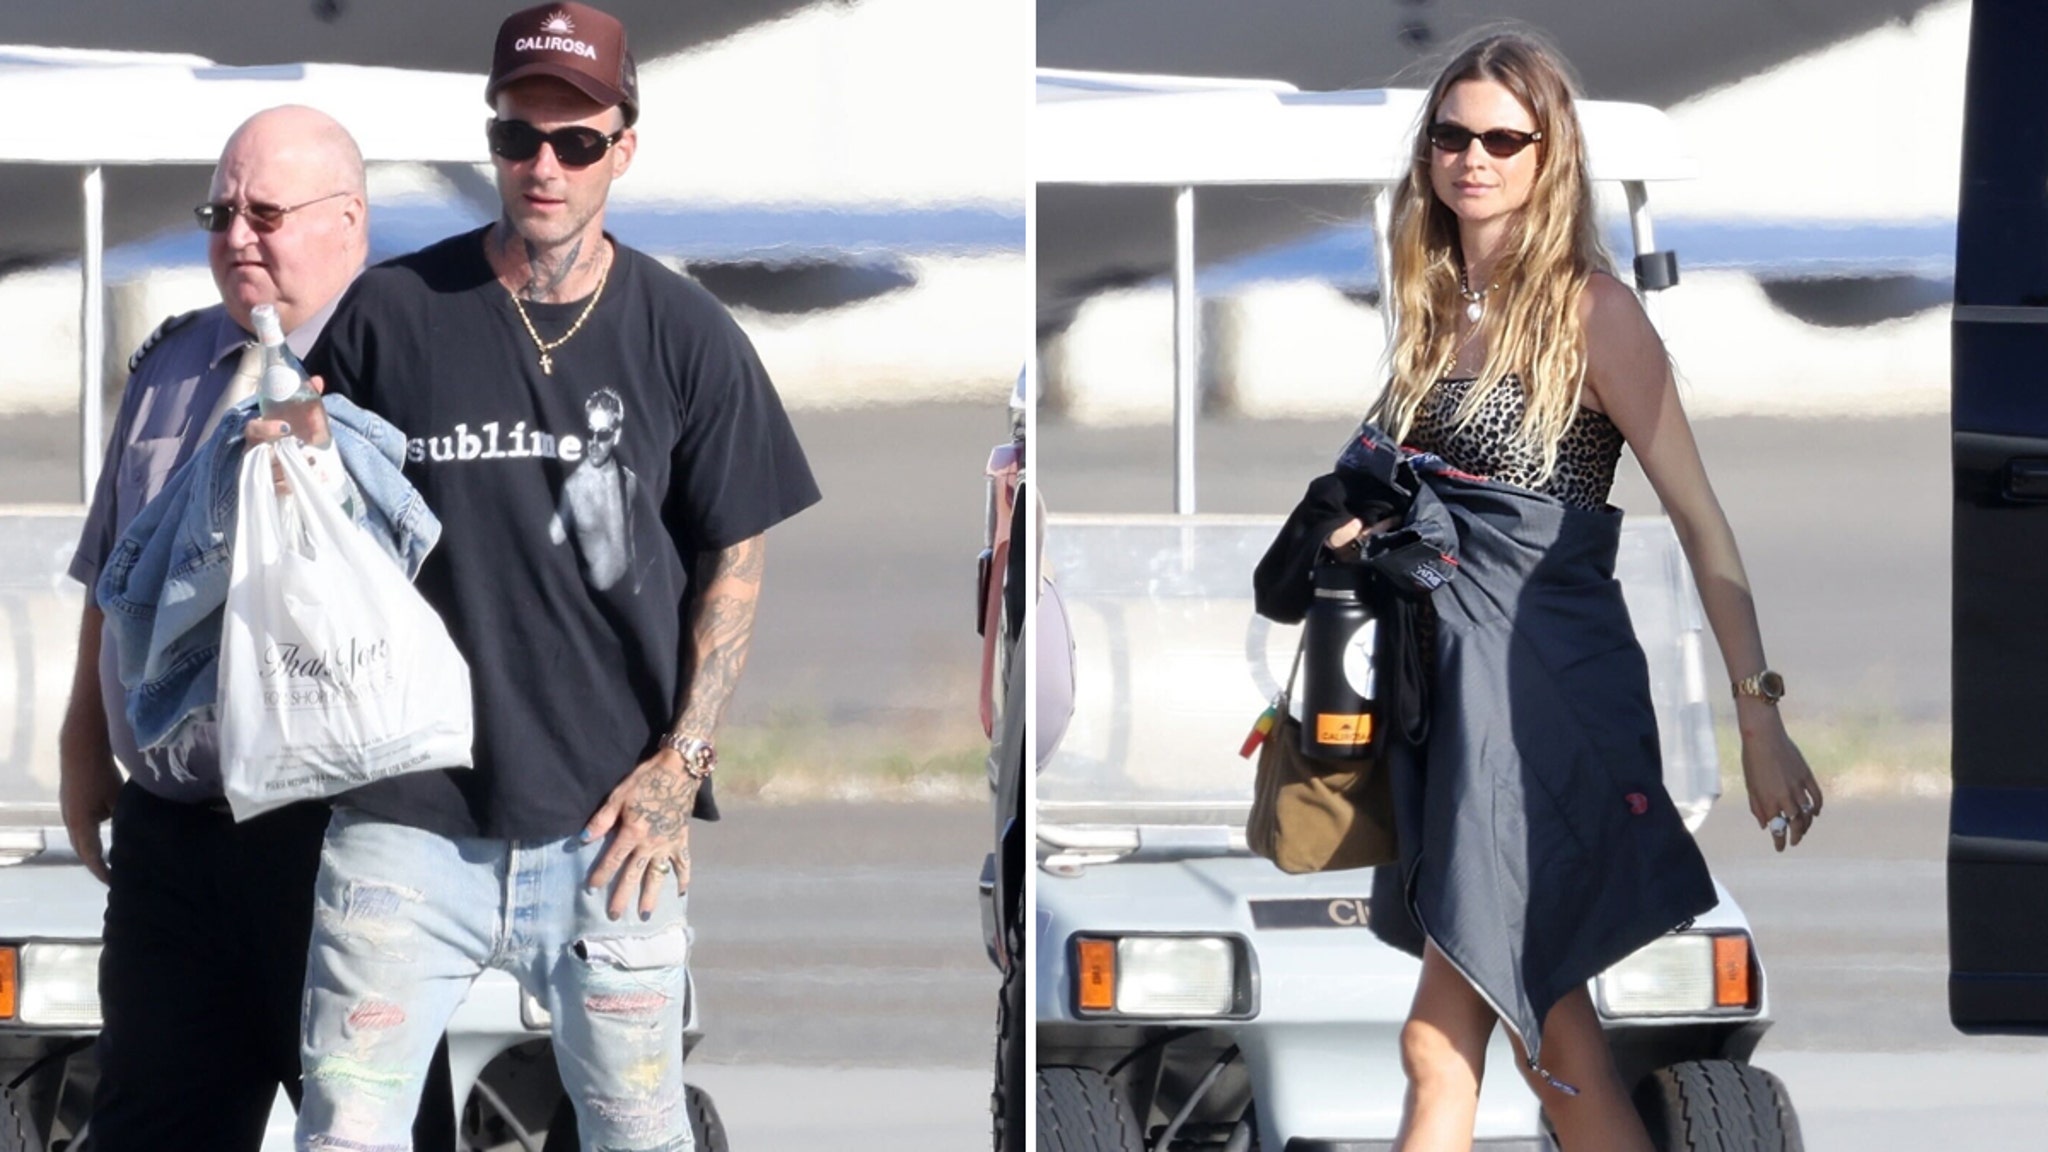 Adam Levine and Wife Behati Prinsloo Showing United Front After Cheating Scandal – TMZ